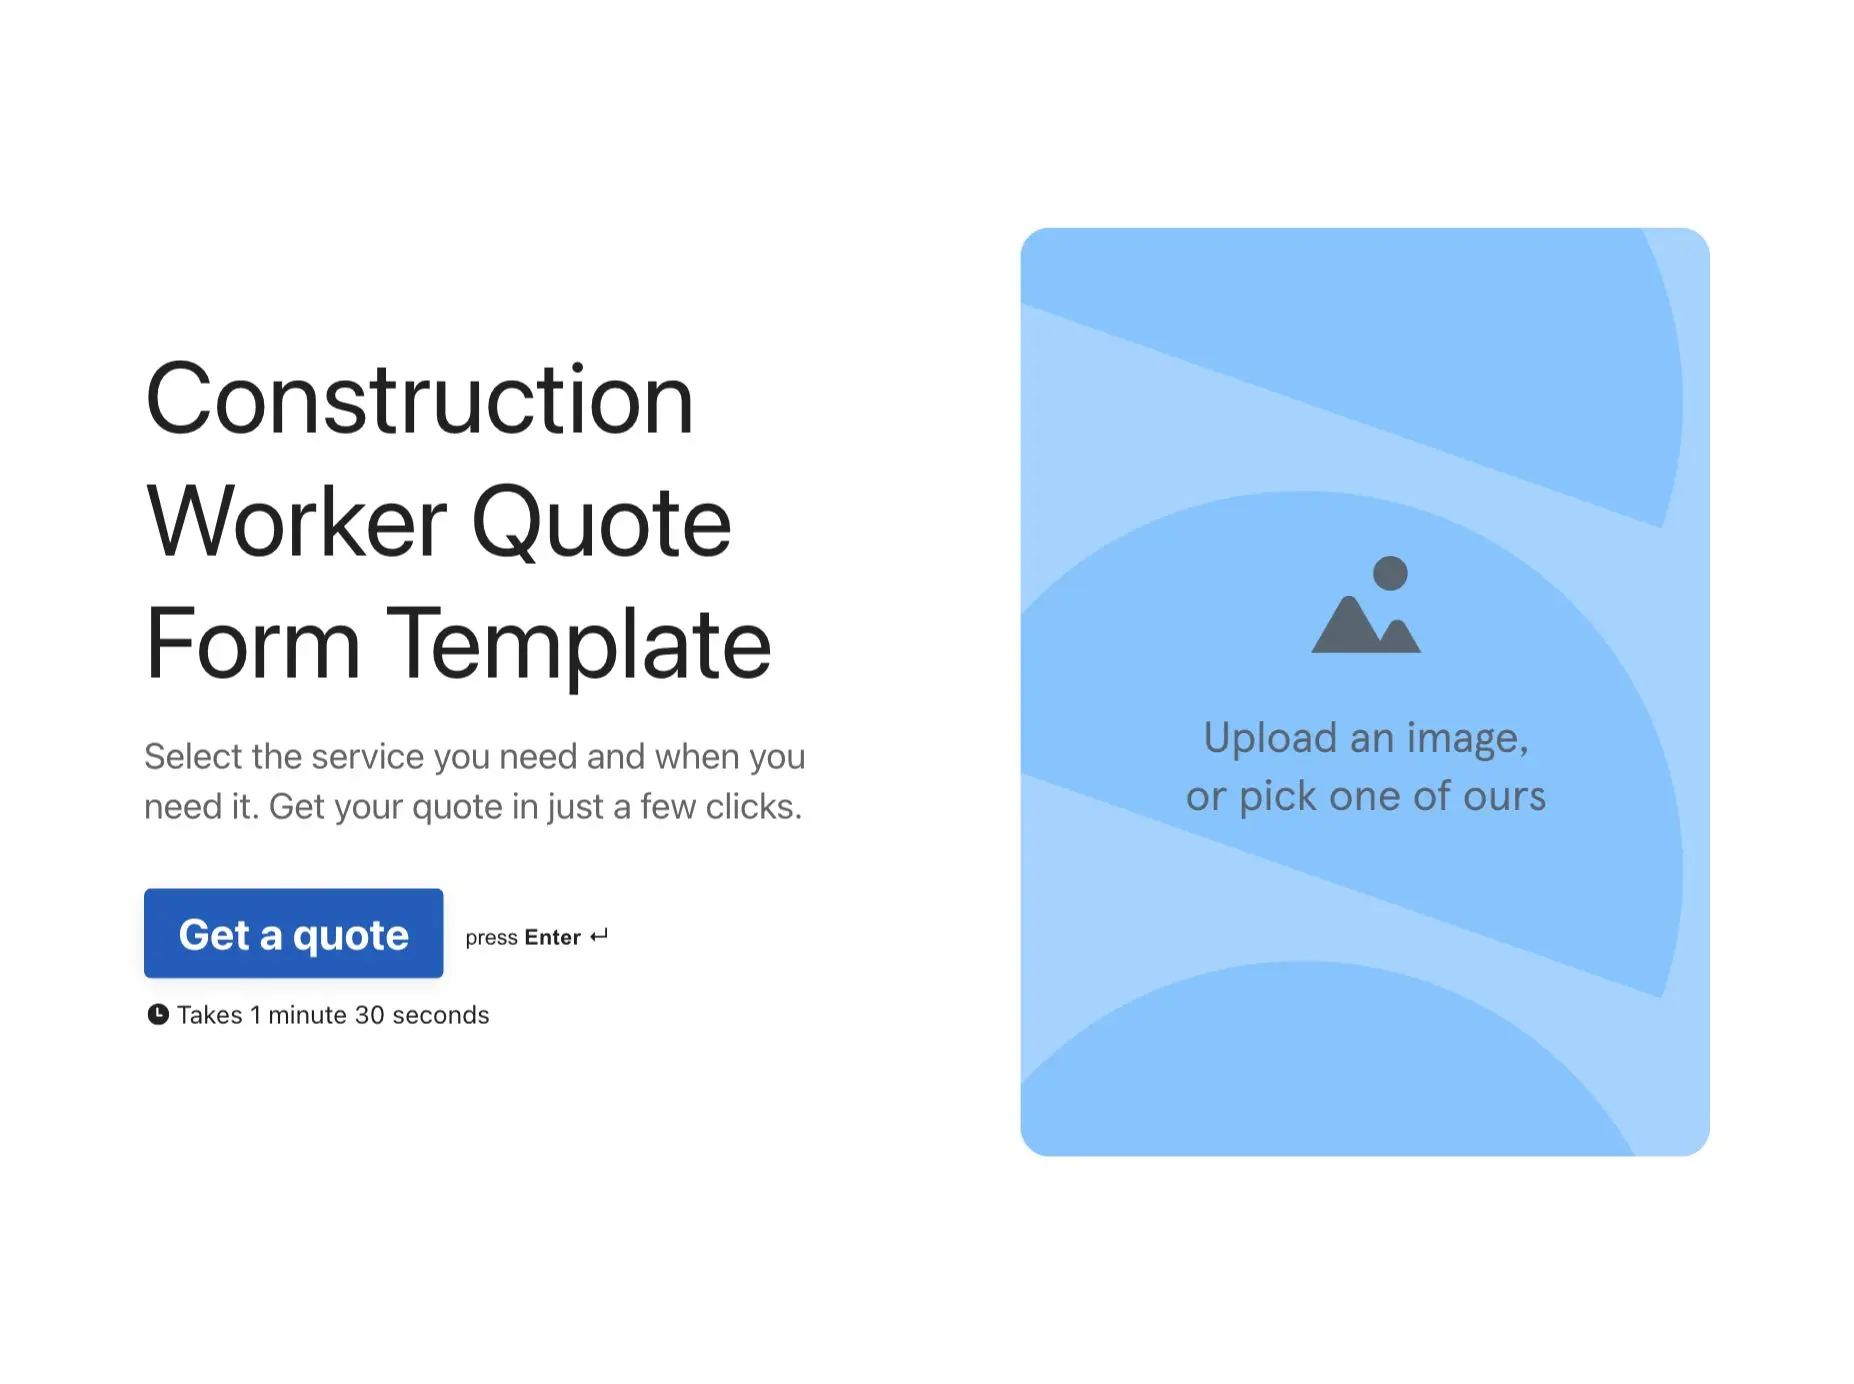 Construction Worker Quote Form Template Hero